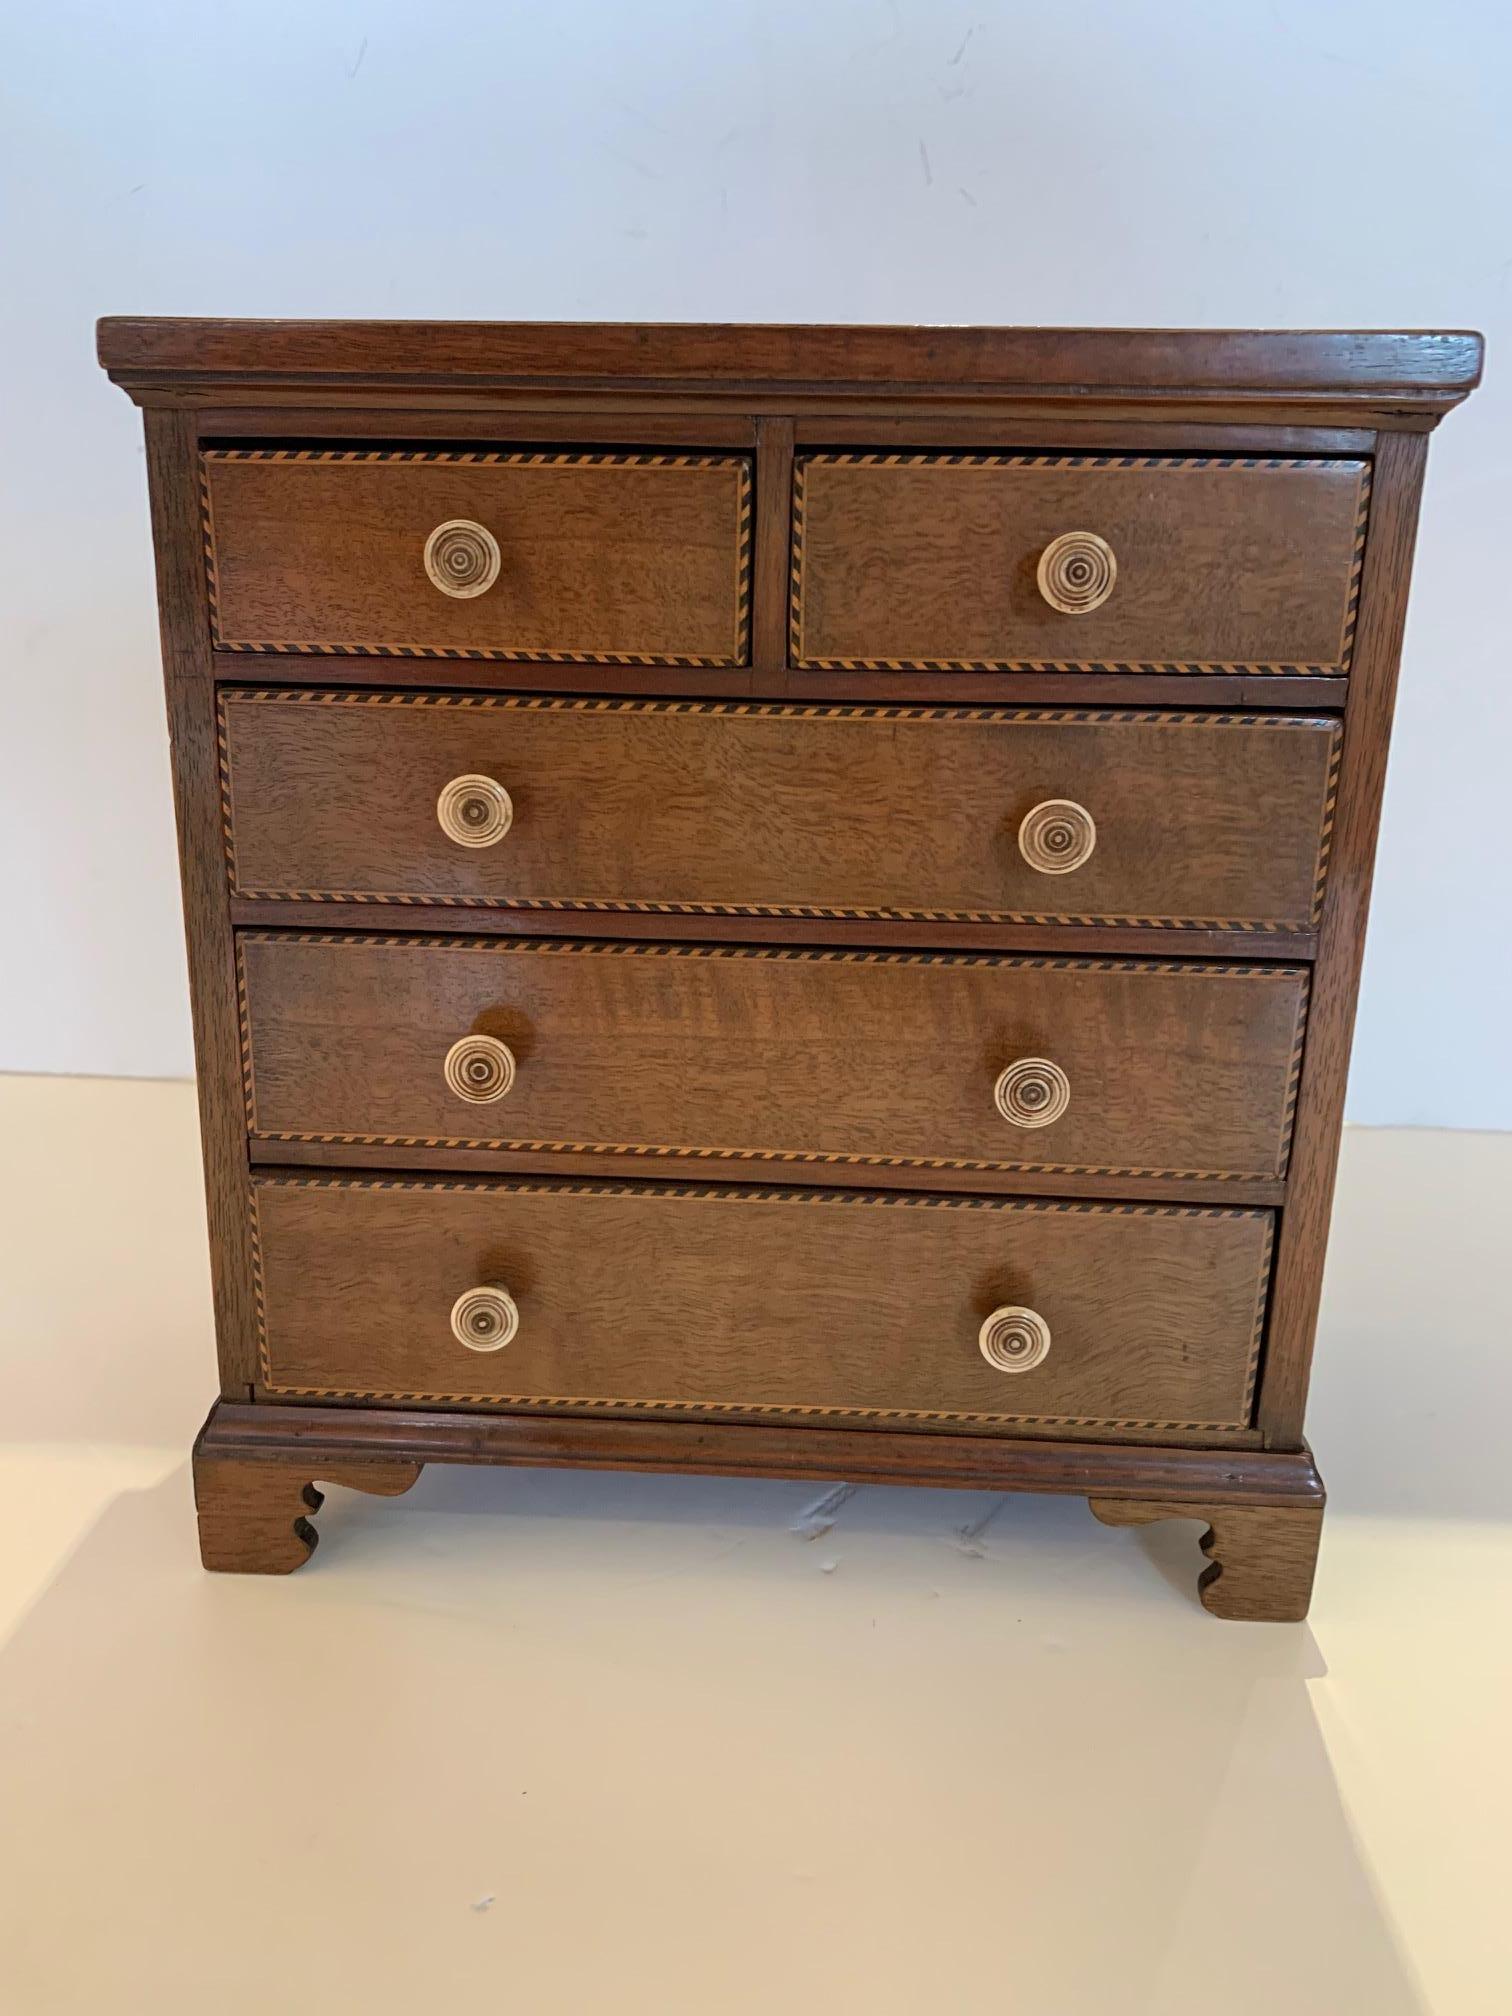 A beautifully made 19th century walnut inlay treasure box that's a miniature chest of drawers having 5 dovetailed drawers with bone hardware. The top has a lovely inlaid seashell adorning it.